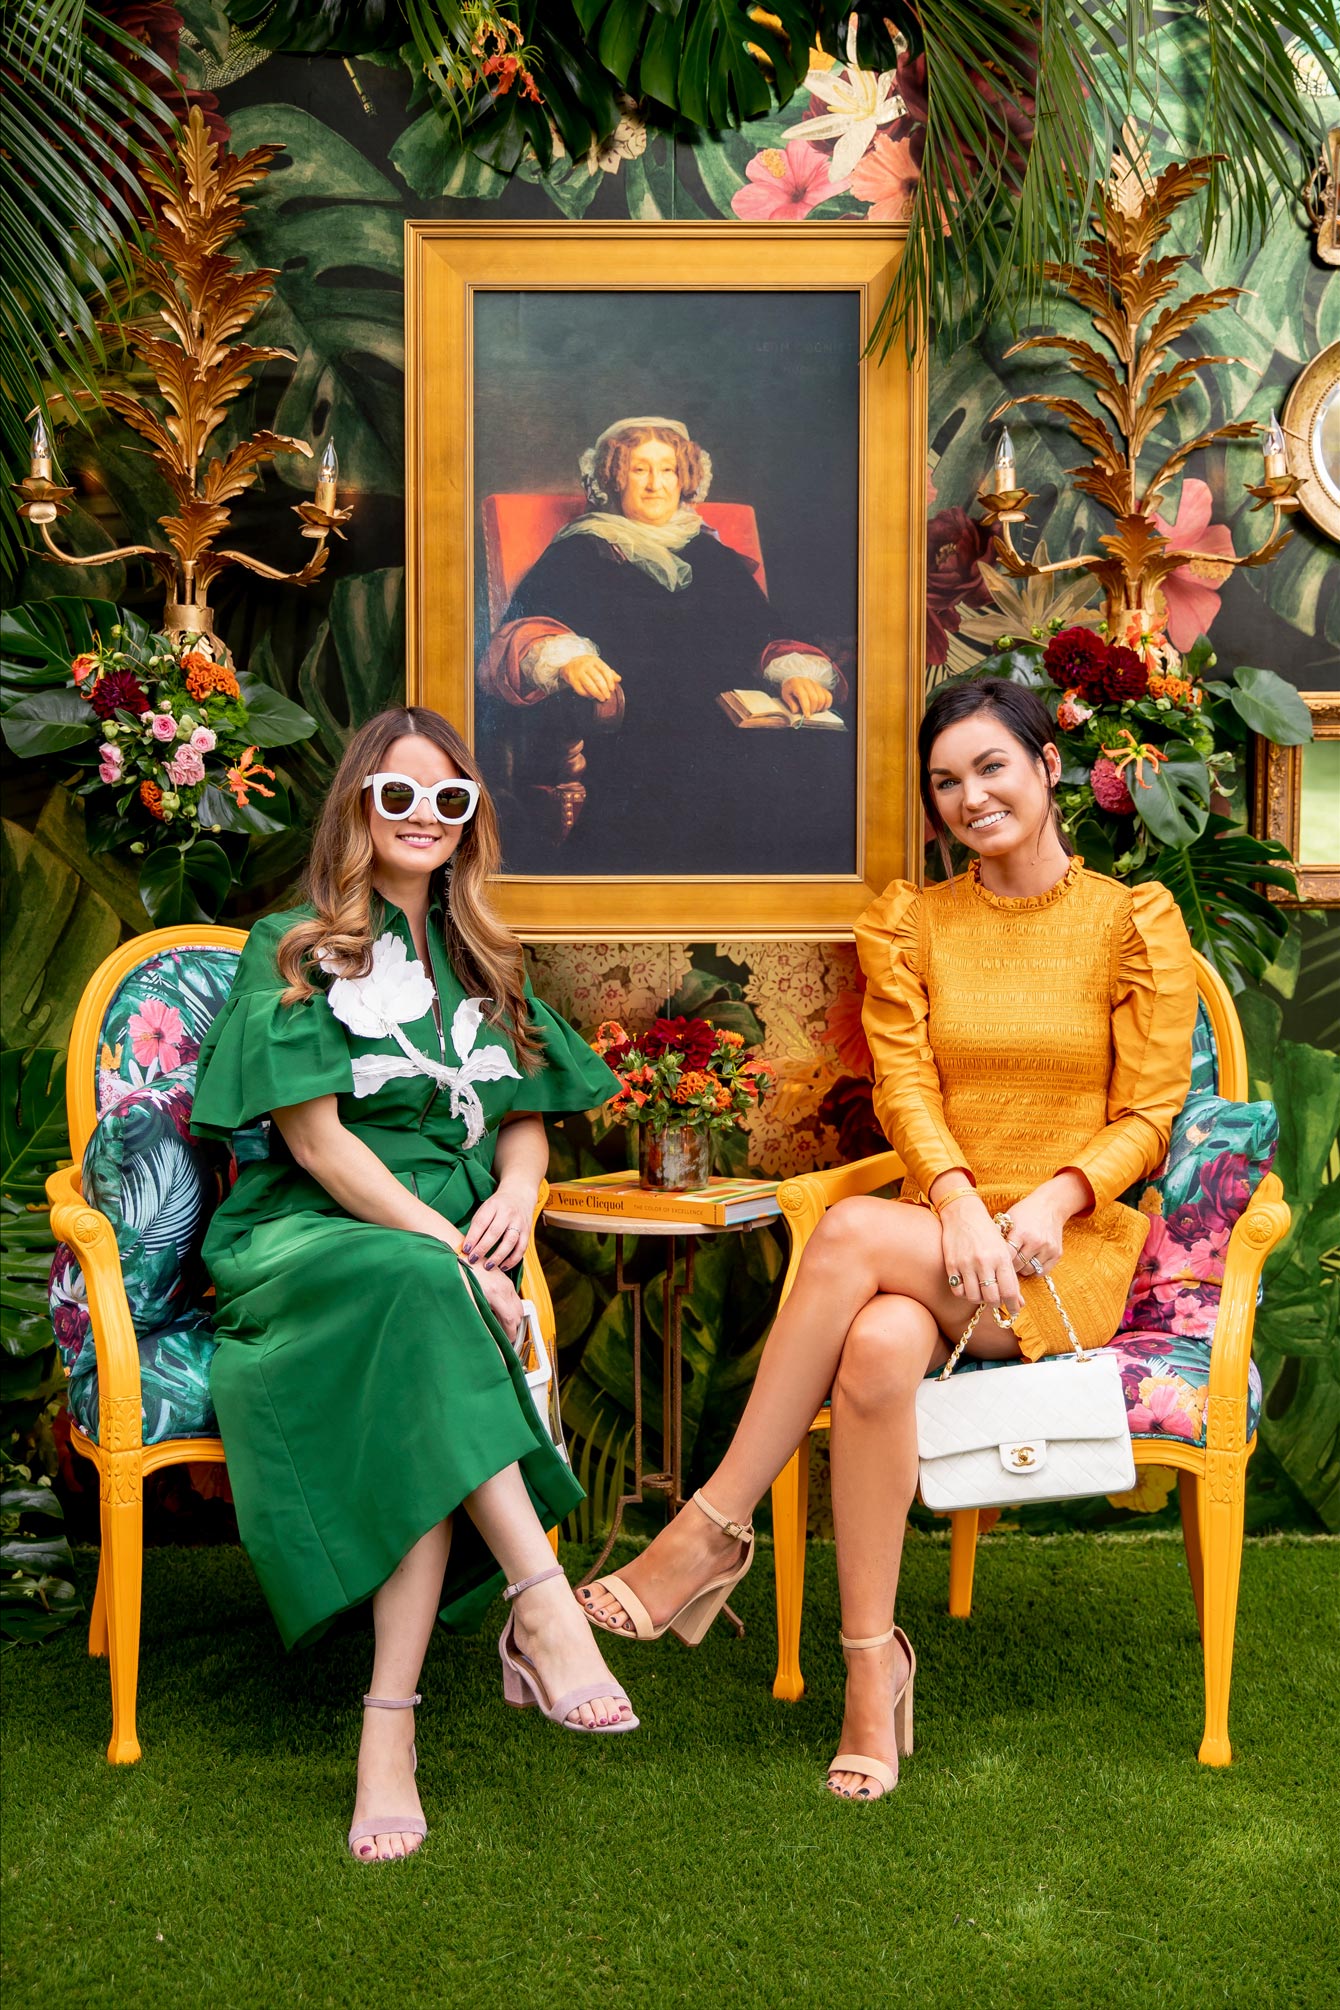 The Veuve Clicquot Polo Classic - A Guide to the Event